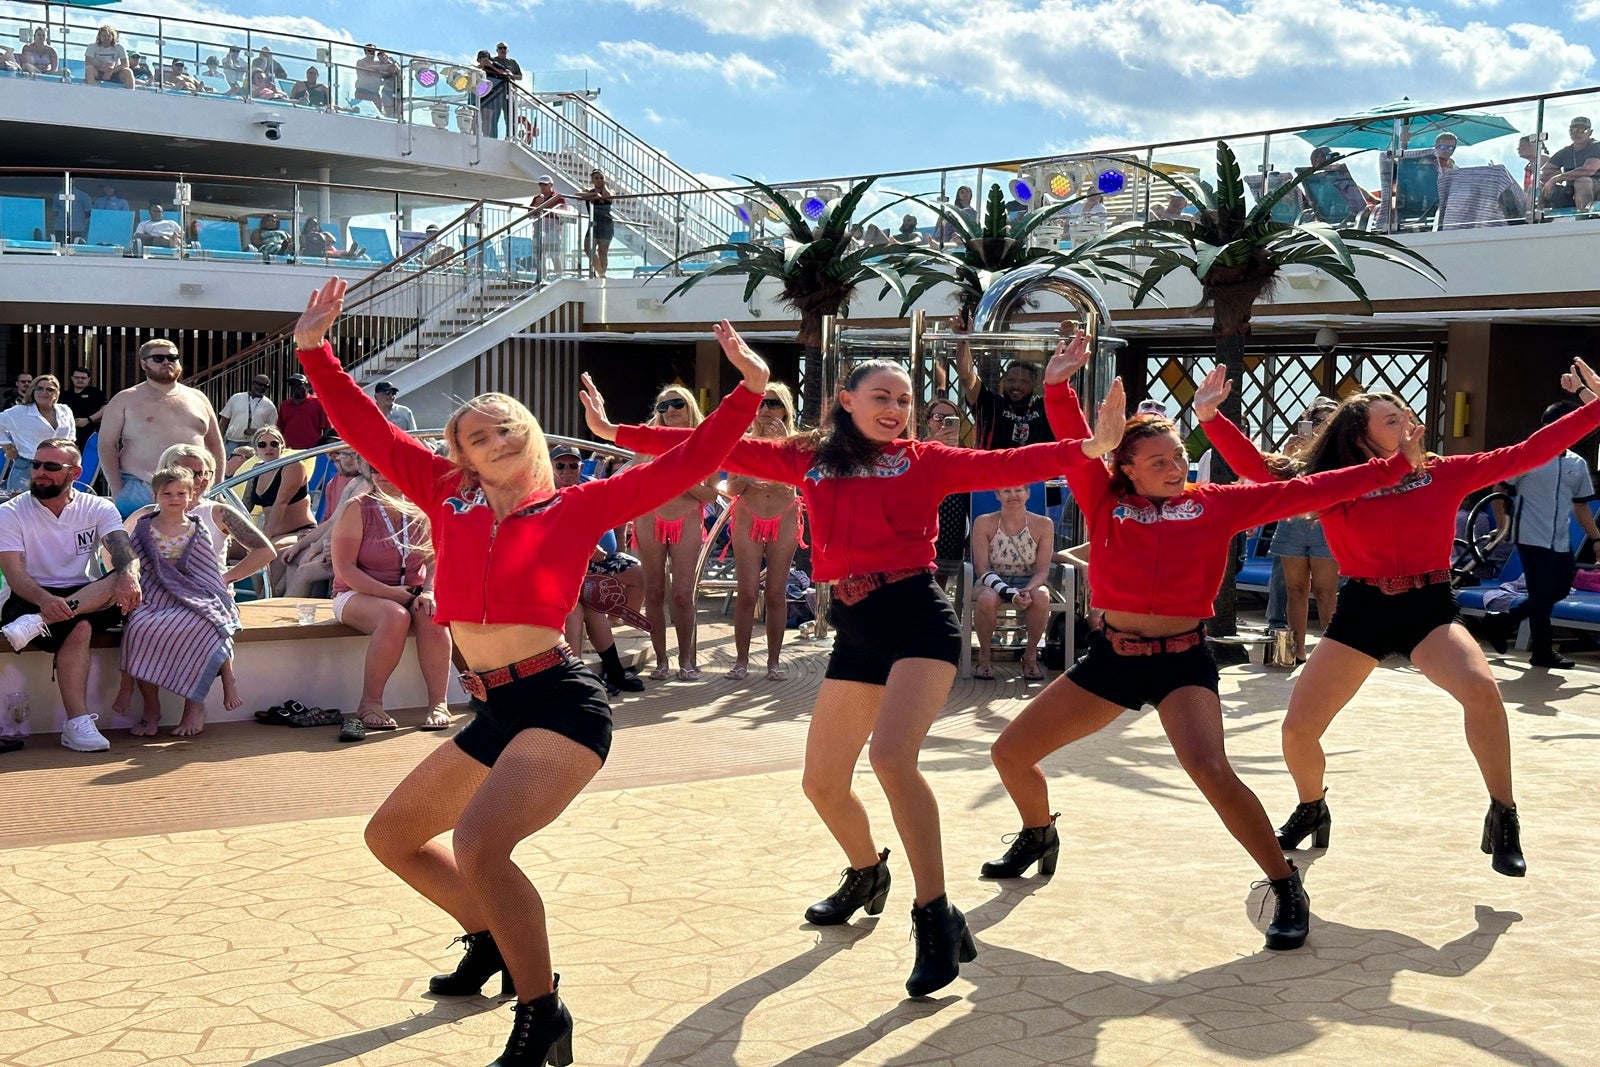 Dancers perform on a cruise ship pool deck